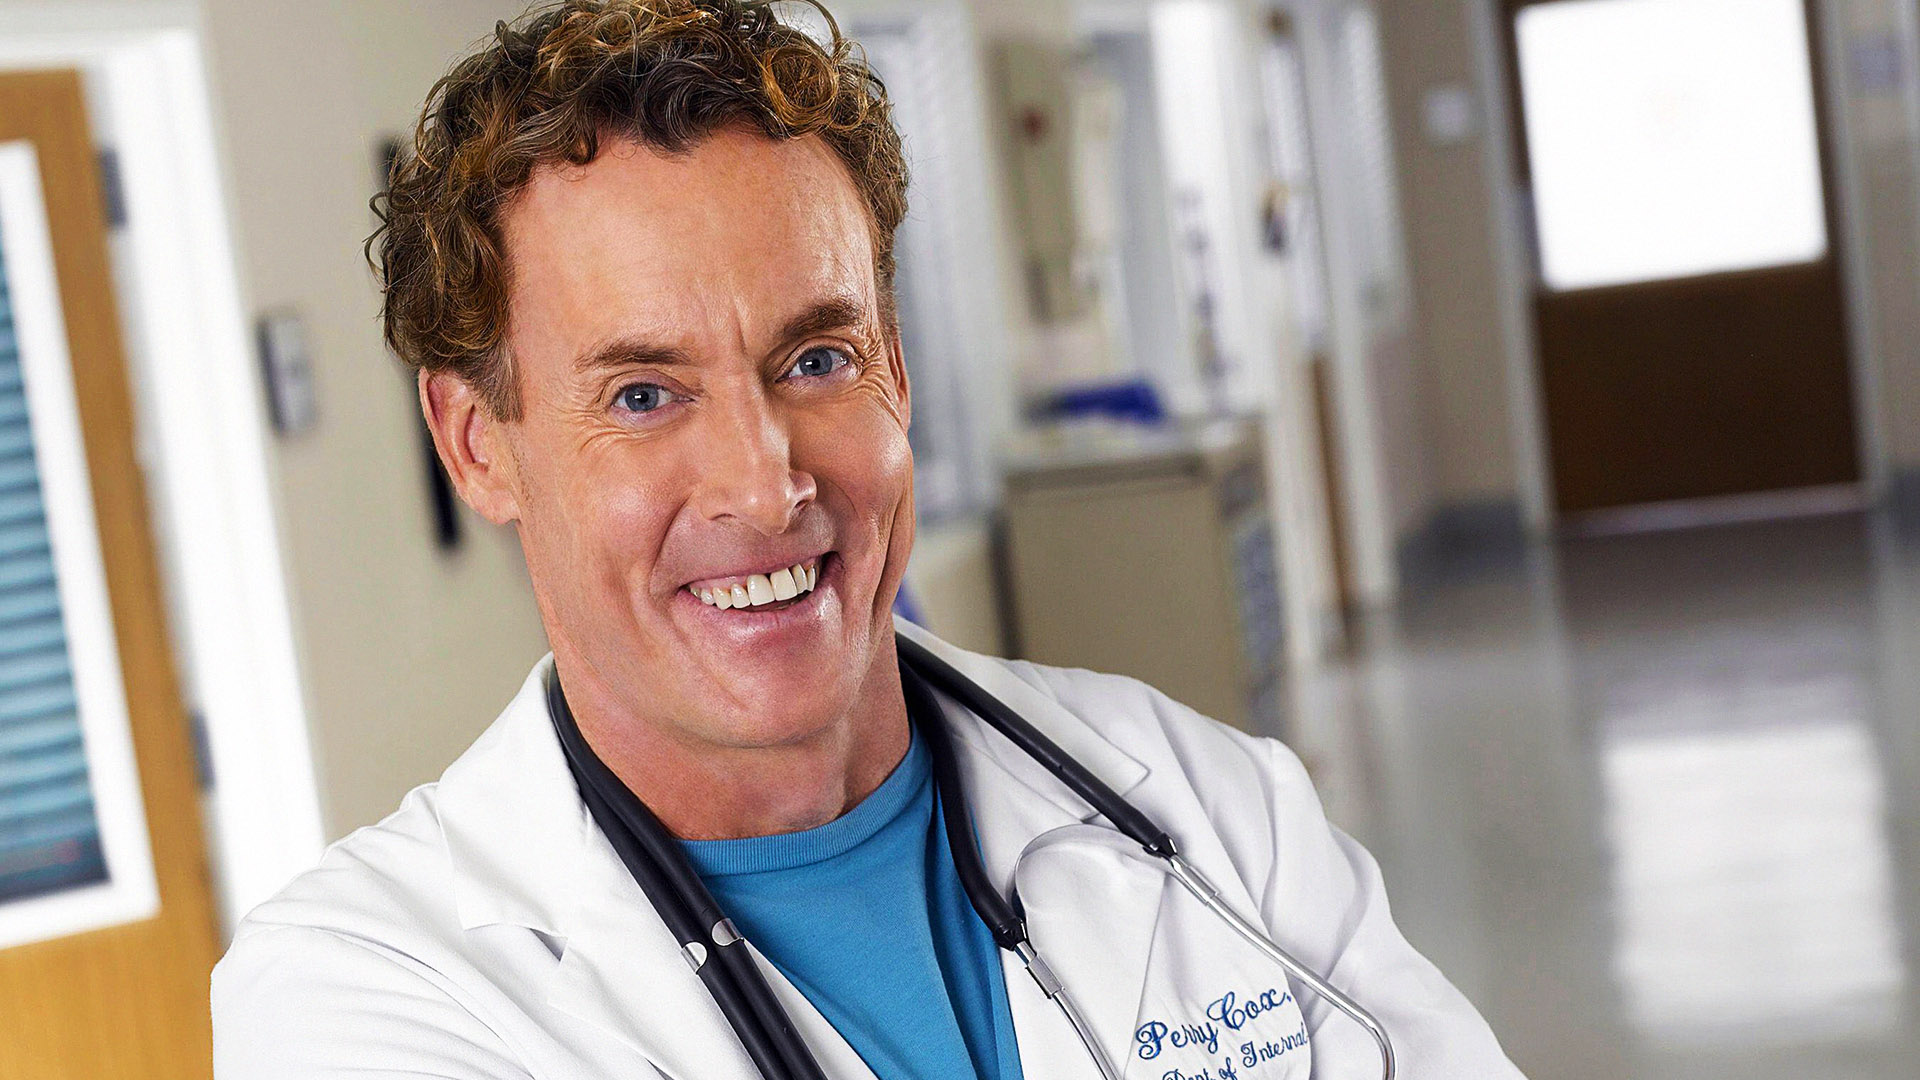 Scrubs Actor Had to Audition 5 Times Despite the Dr Cox Role Description Referencing Him